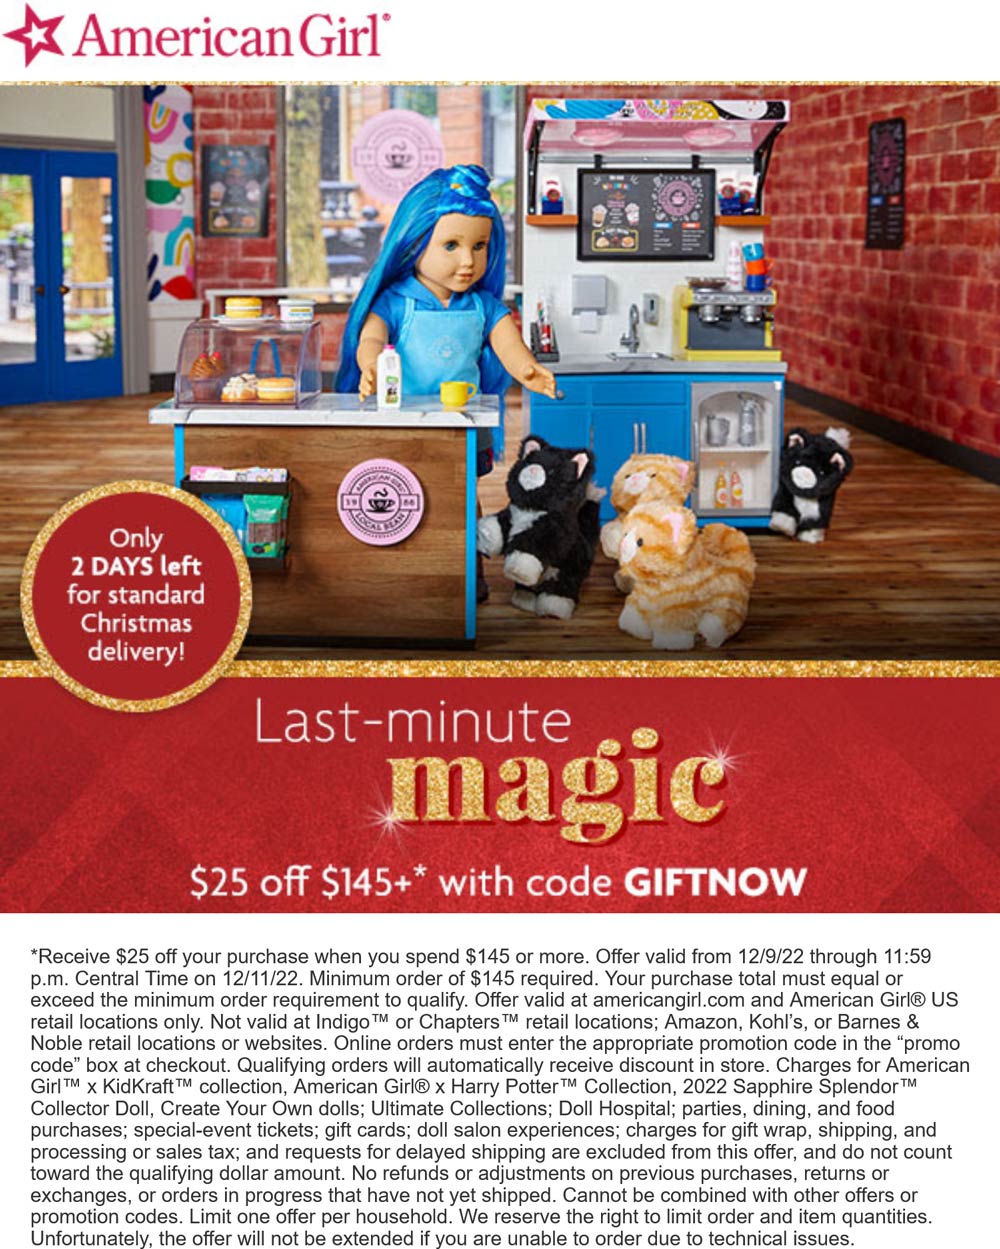 American Girl stores Coupon  $25 off $145 today at American Girl doll via promo code GIFTNOW #americangirl 